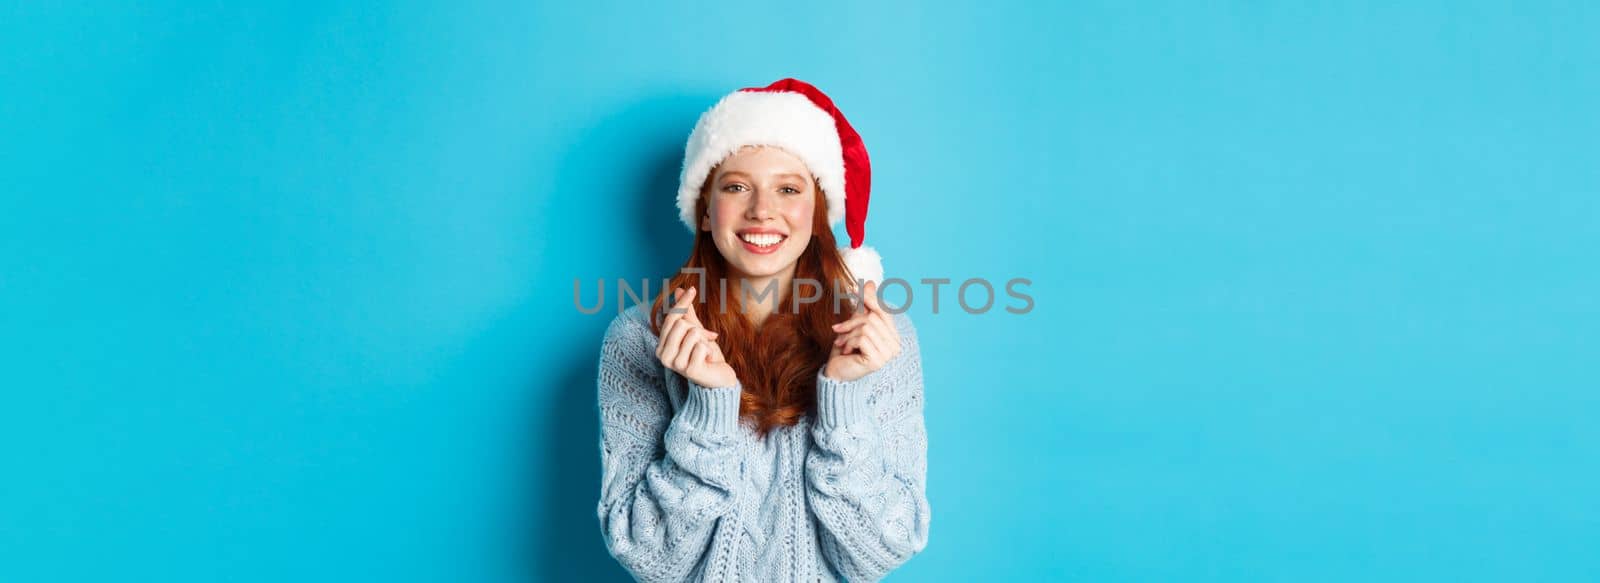 Winter holidays and Christmas Eve concept. Hopeful redhead girl in santa hat, making wish on xmas with fingers crossed, wearing santa hat, standing over blue background.